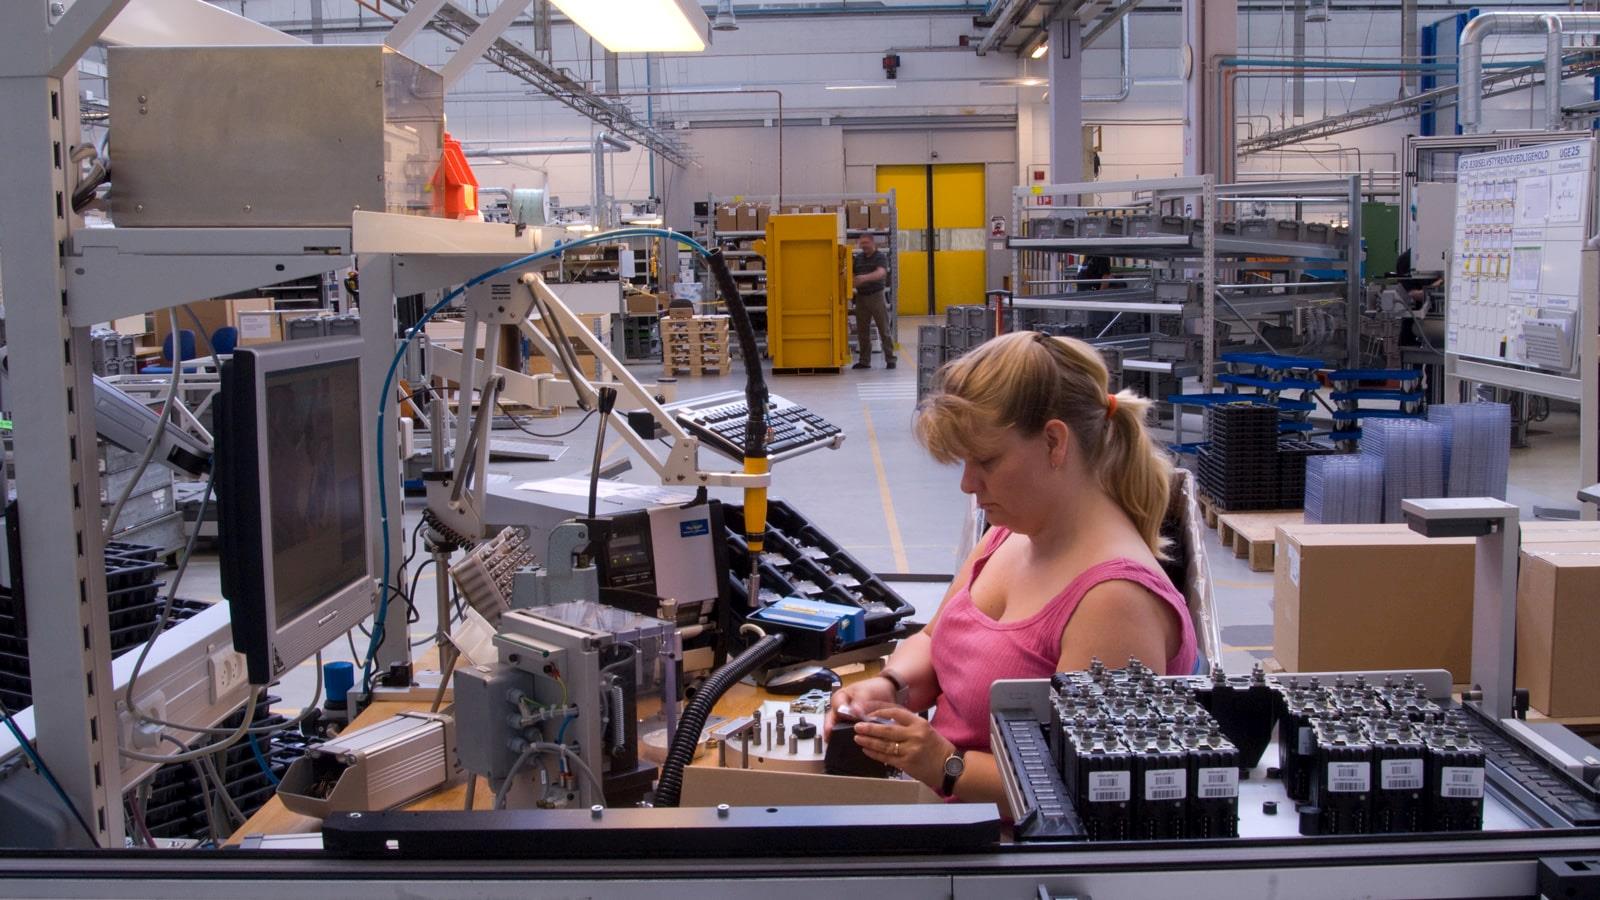 Blond woman in pink blouse working at assembly line at Sauer-Danfoss